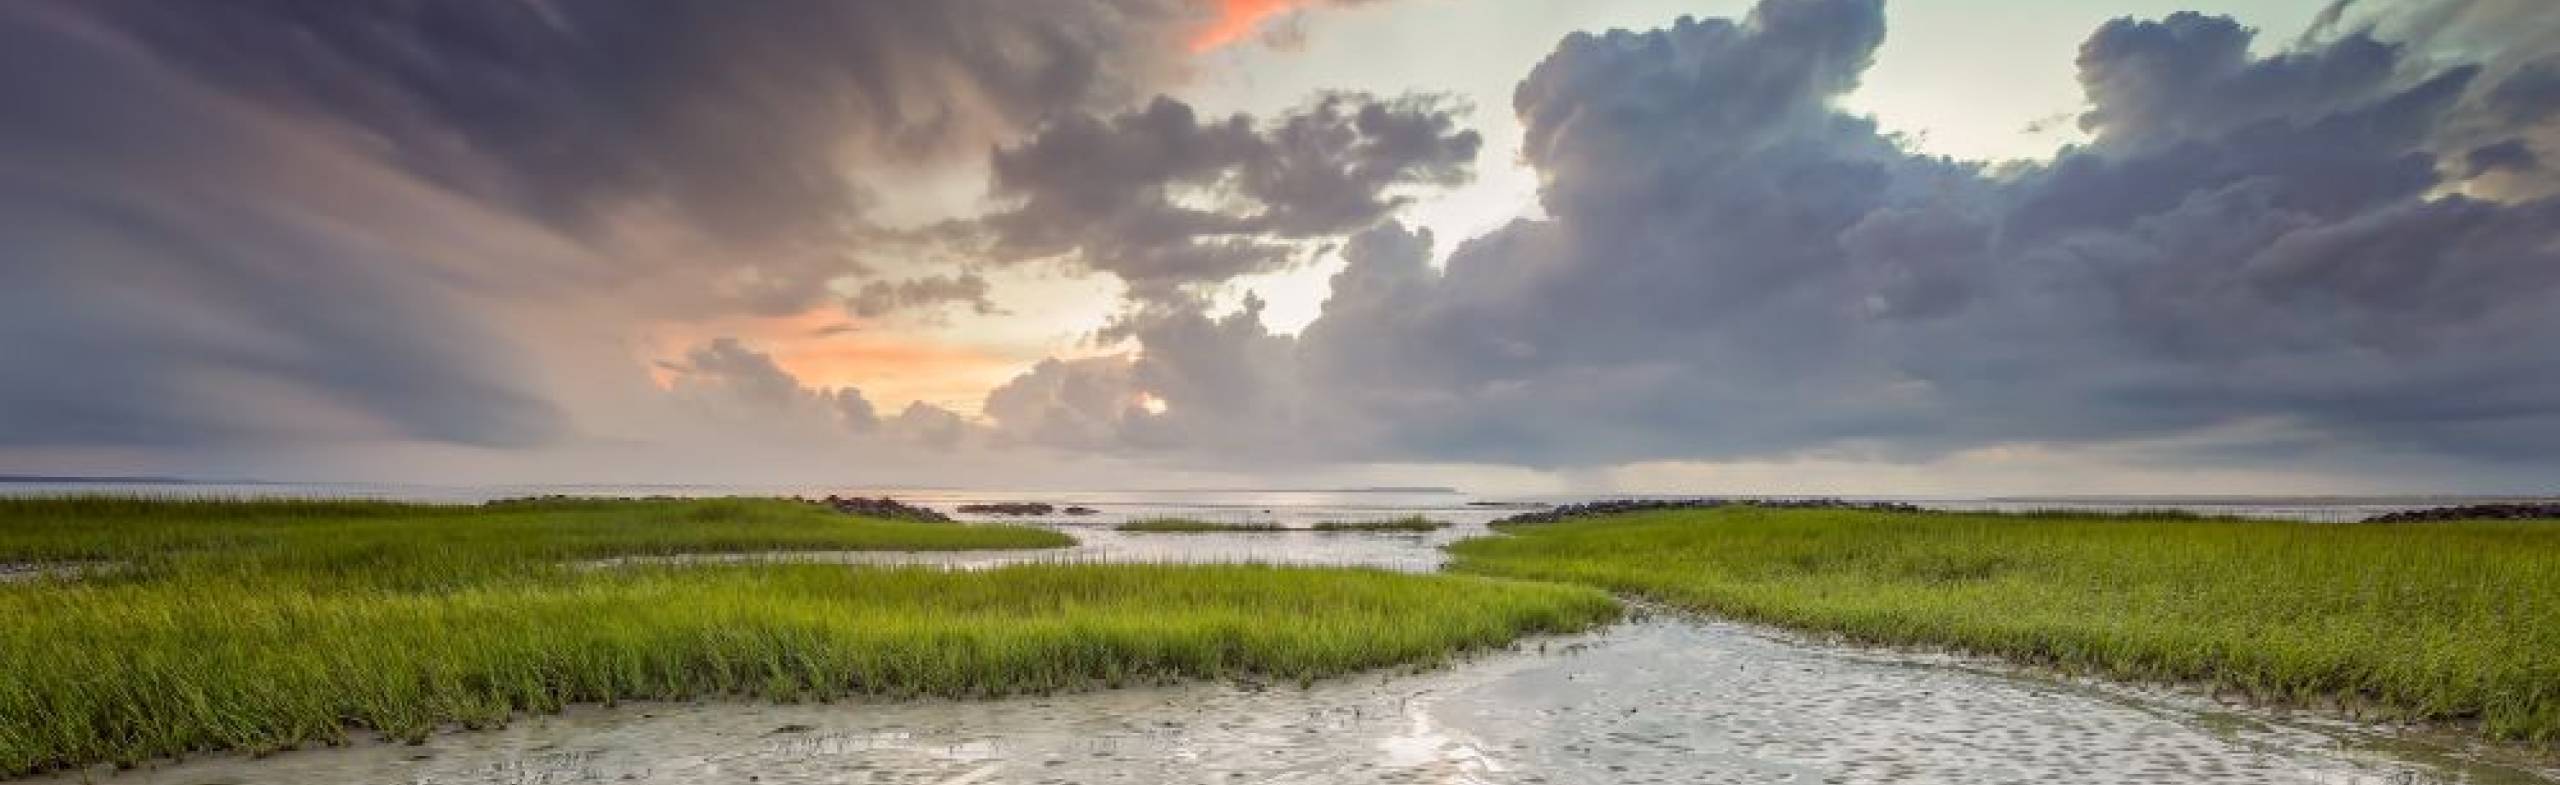 TREAT YOURSELF TO THE BEST OF THE BEST IN 2022 WITH AN ESCAPE TO AMERICA’S #1 ISLAND: HILTON HEAD! Blog Post